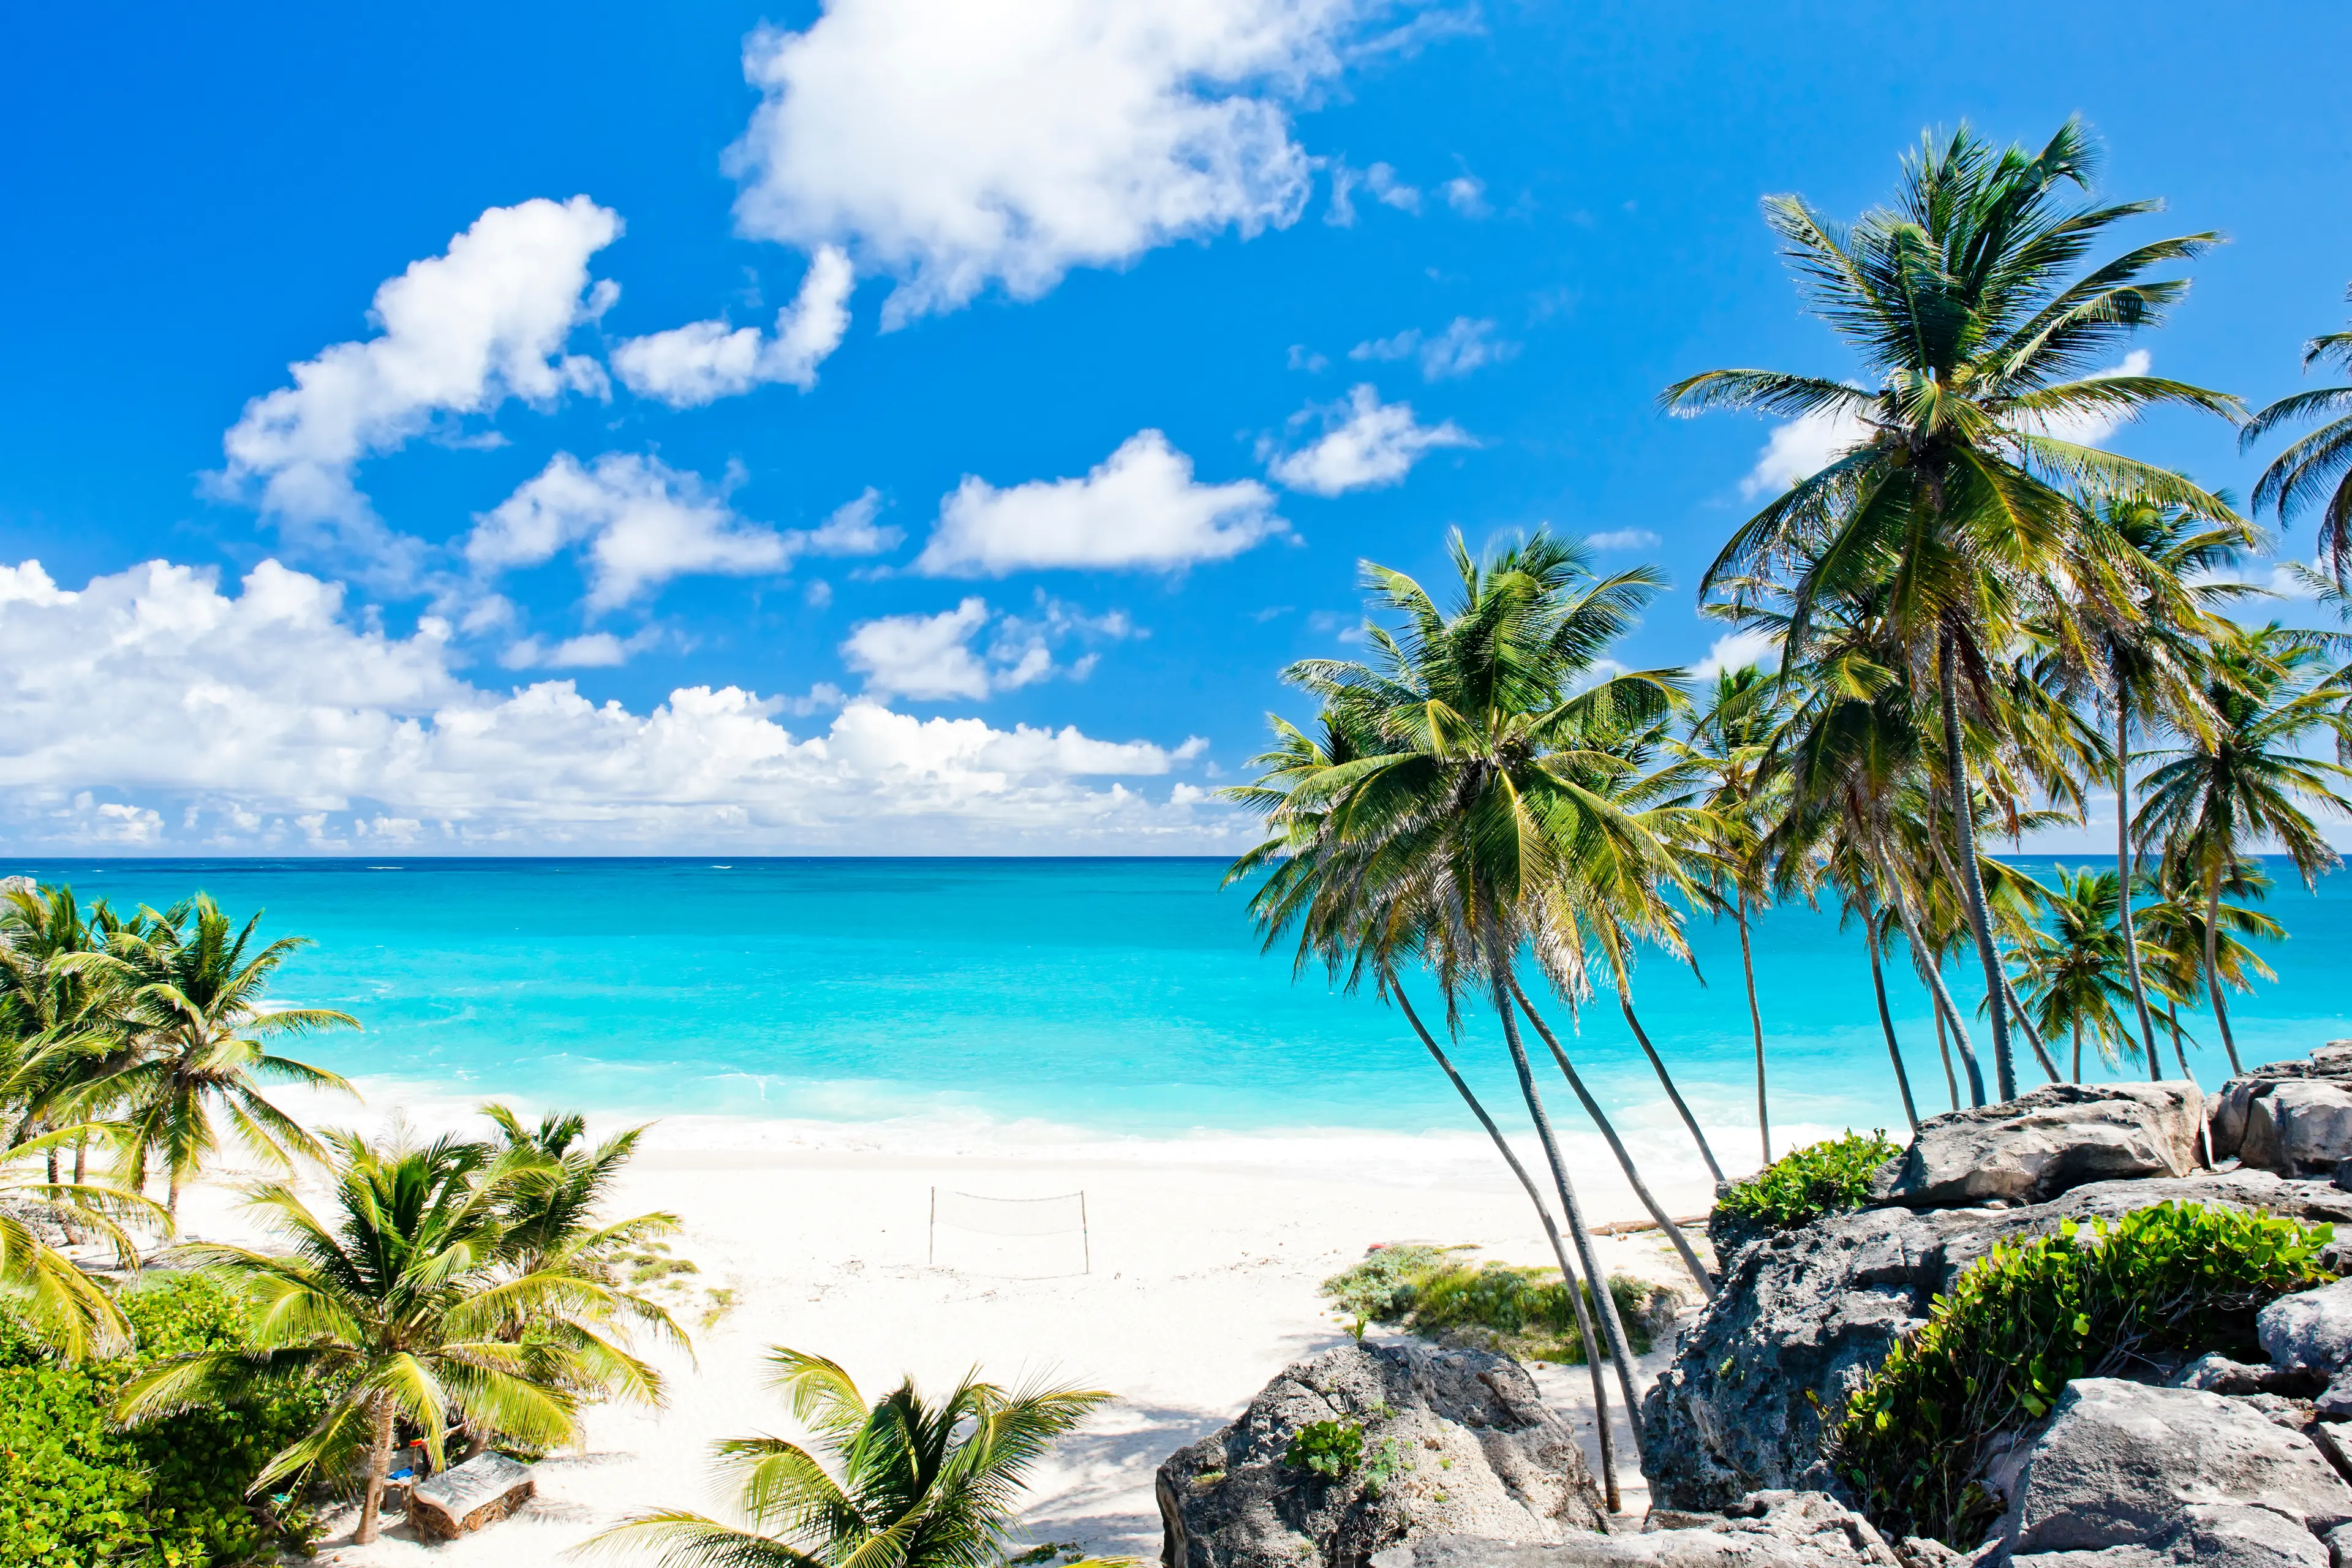 Explore Barbados: A Marvelous One-Day Itinerary